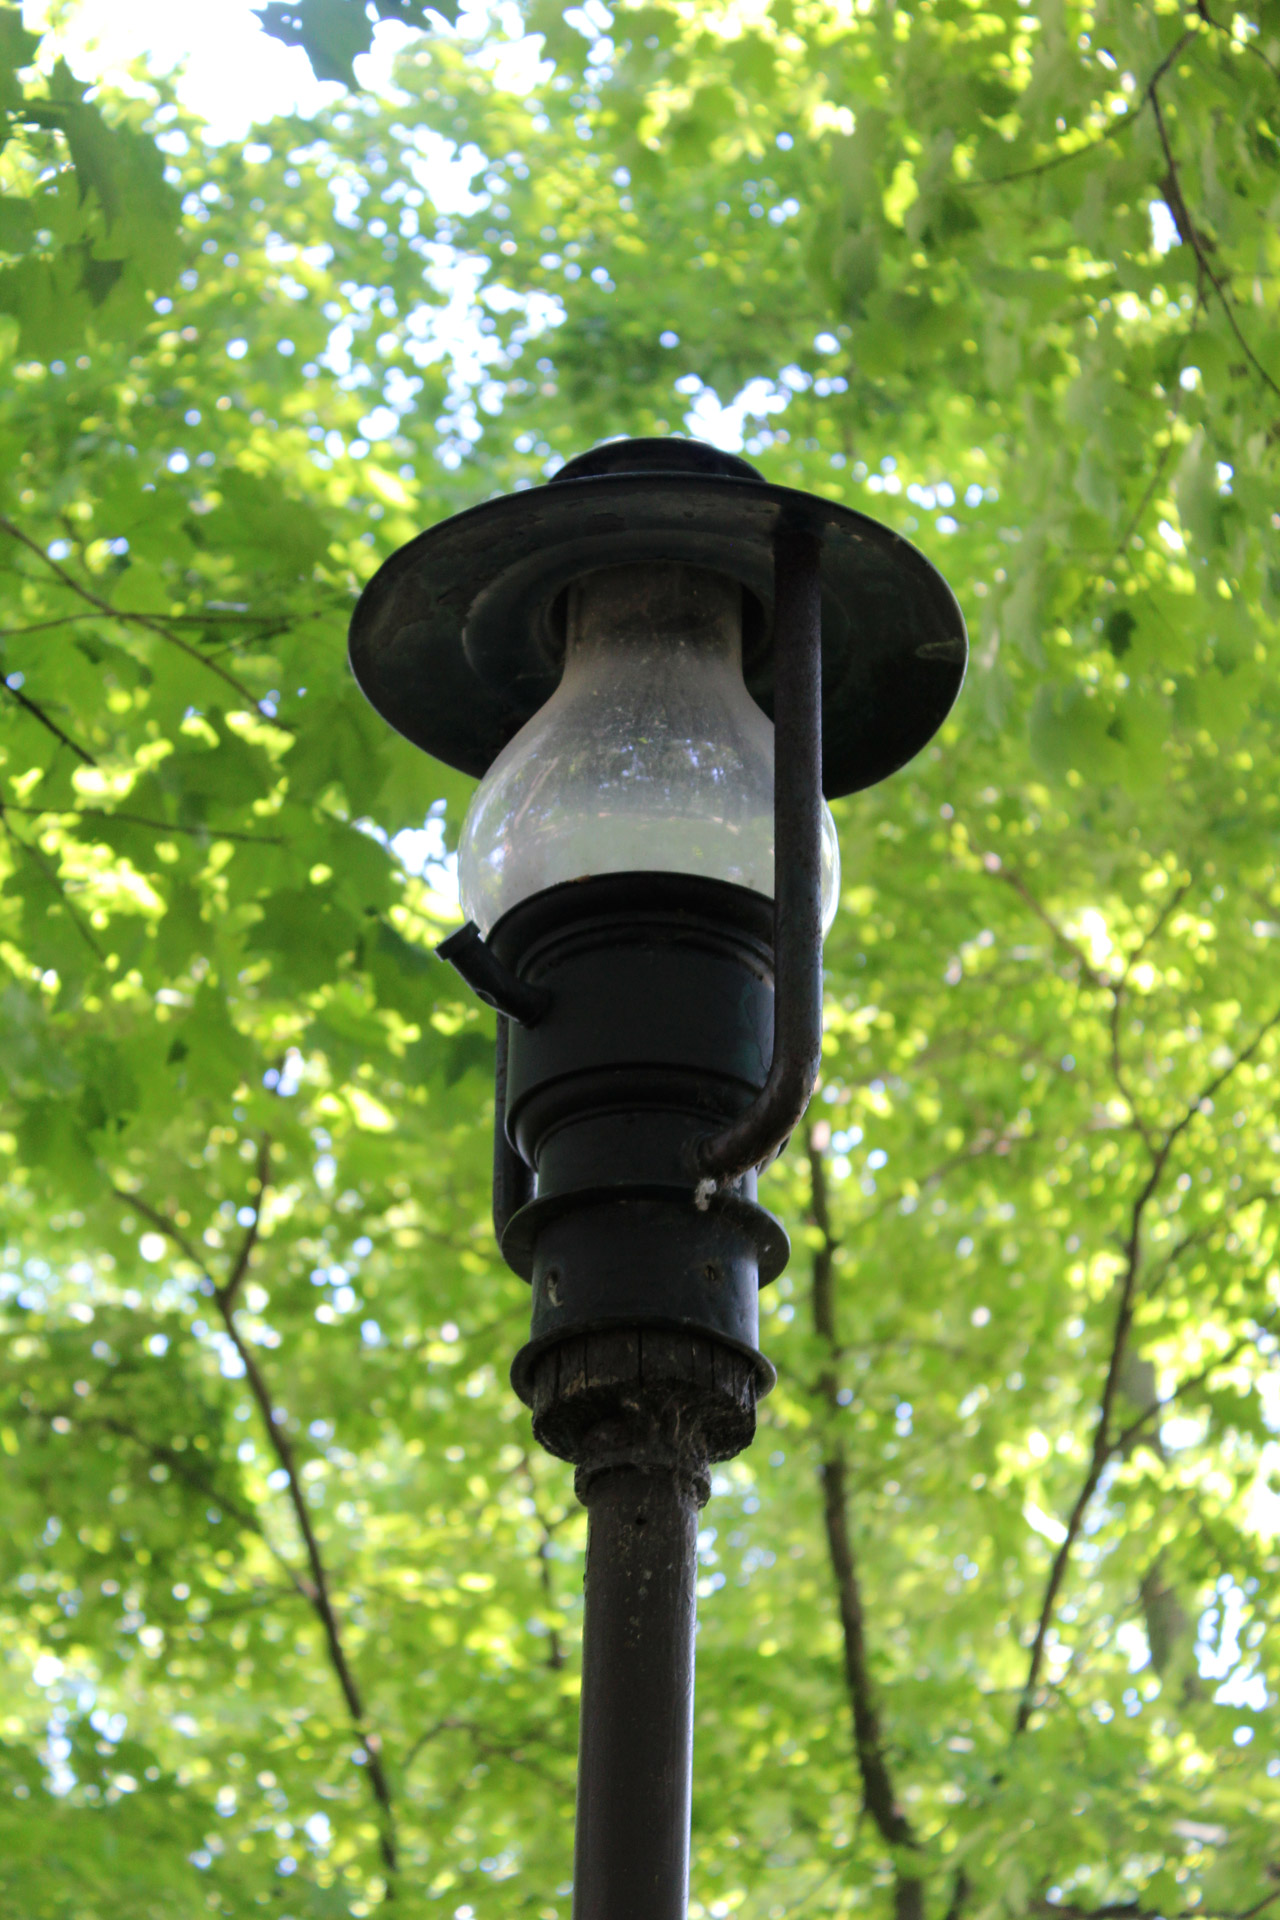 The Lamppost